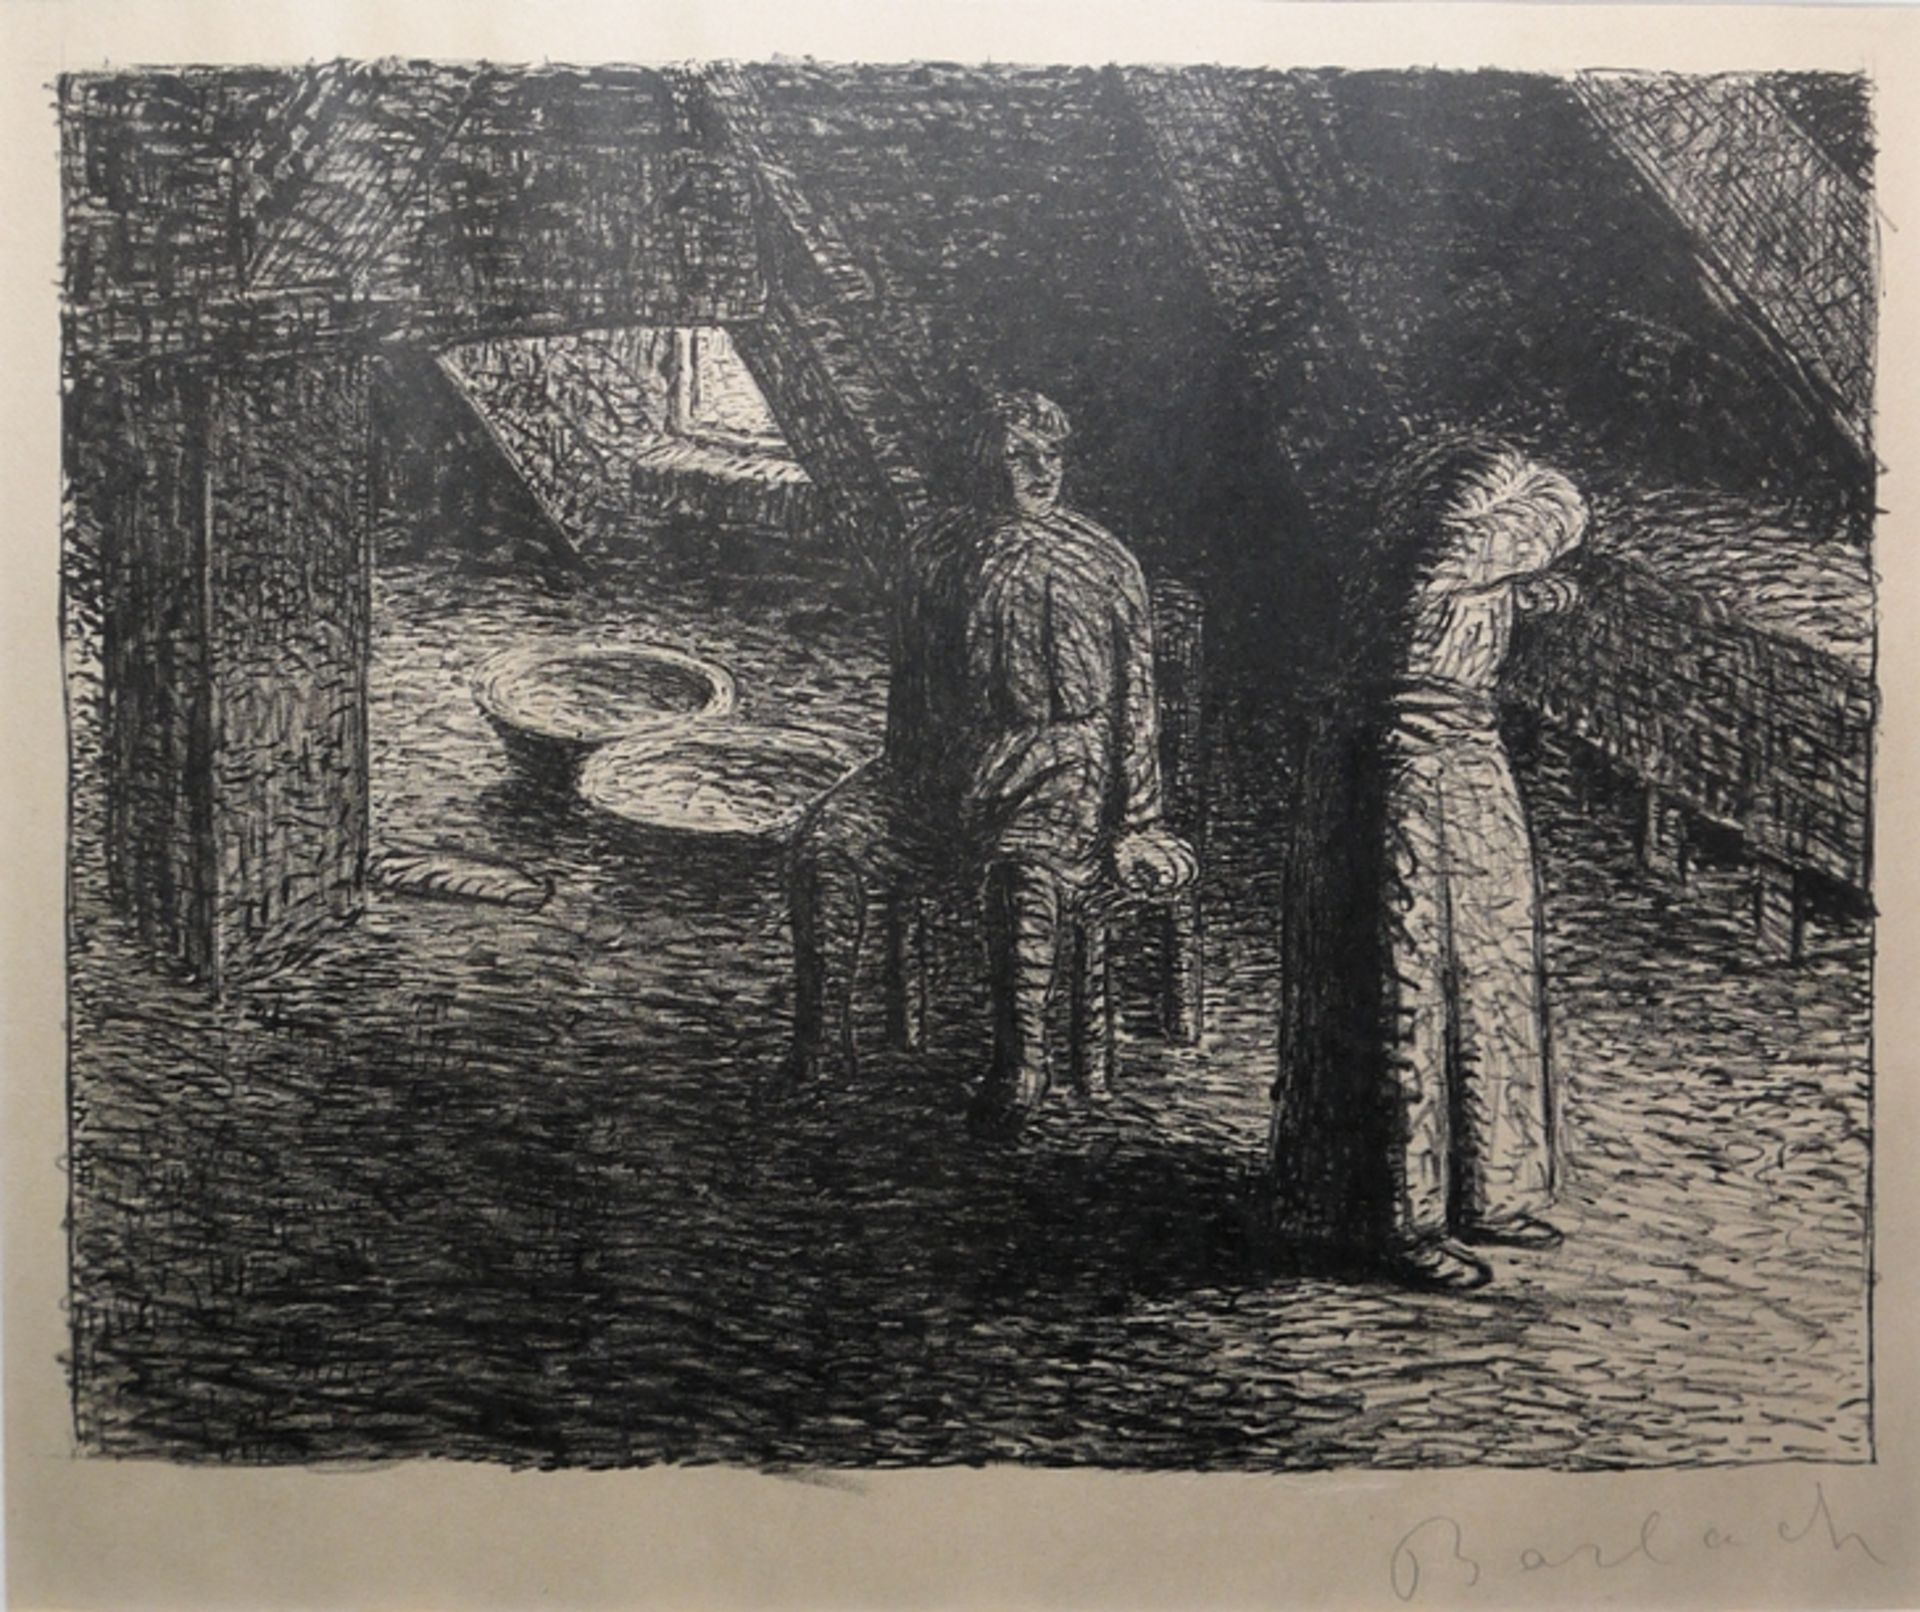 Ernst Barlach, sheet 19 "Die Schuldbewusste" from: "Der tote Tag", signed lithograph from 1912, fra